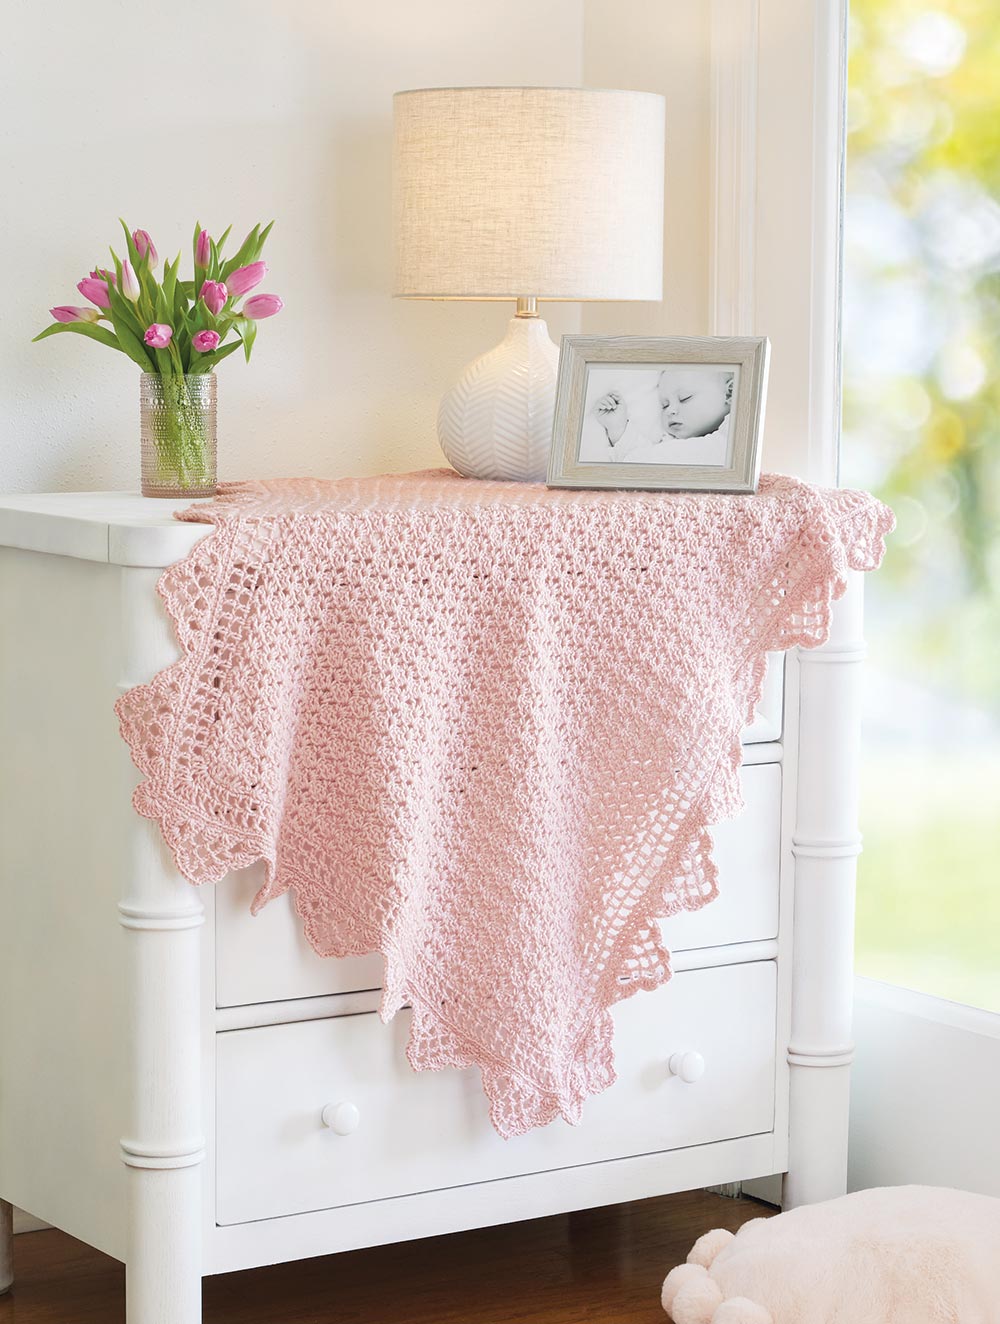 Crocheted Lacy Bordered Baby Blanket Pattern